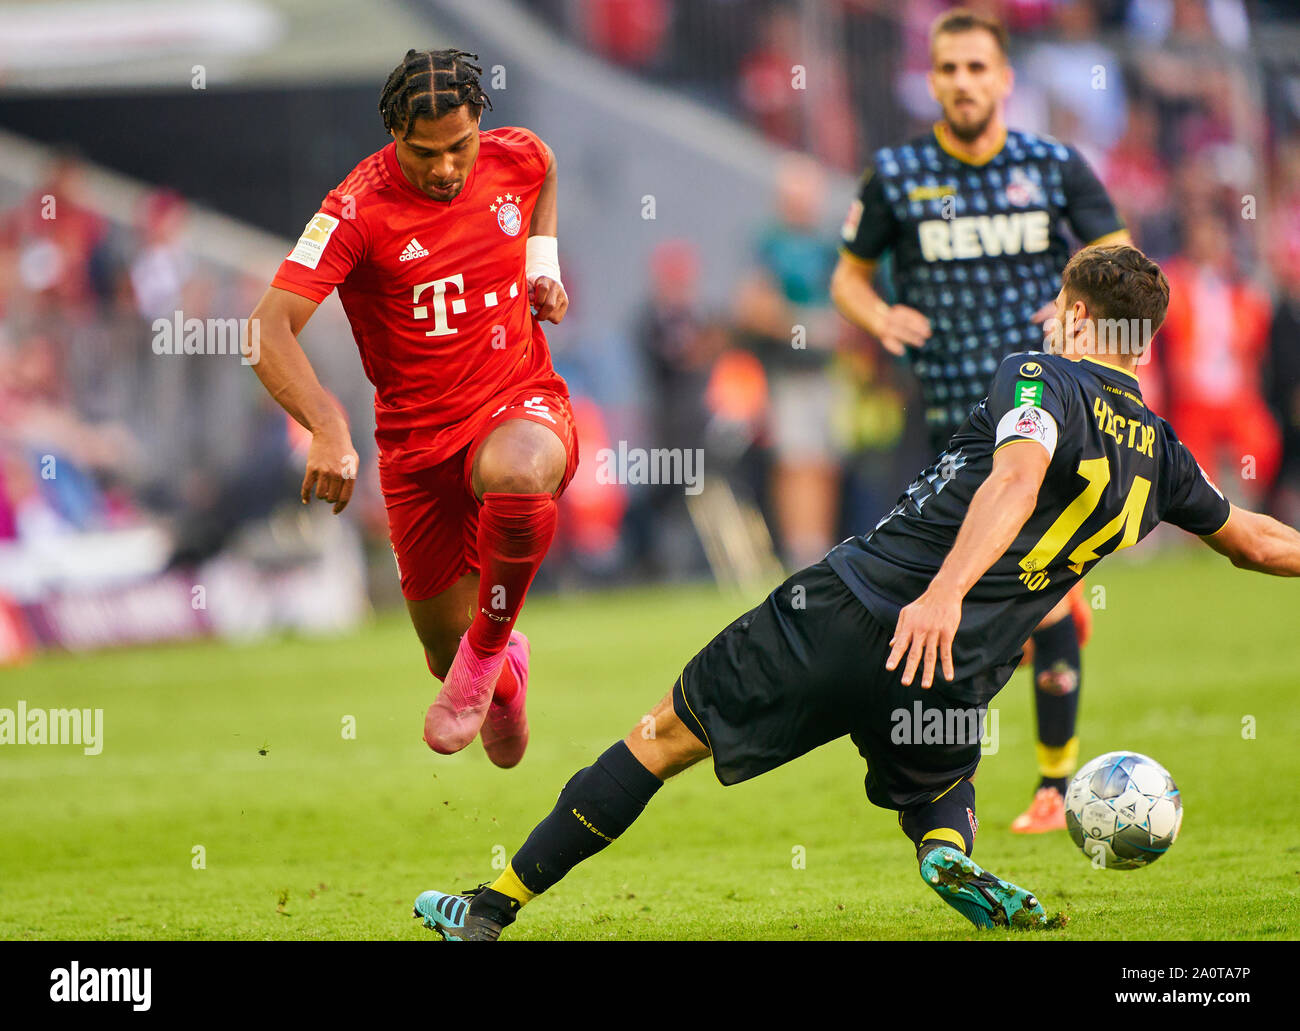 Munich, Germany. 21st Sep, 2019. Serge GNABRY, FCB 22 compete for the ball, tackling, duel, header, zweikampf, action, fight against Jonas HECTOR, 1.FCK 14 FC BAYERN MUNICH - 1.FC KÖLN 4-0 - DFL REGULATIONS PROHIBIT ANY USE OF PHOTOGRAPHS as IMAGE SEQUENCES and/or QUASI-VIDEO - 1.German Soccer League, Munich, September 21, 2019 Season 2019/2020, matchday 05, FCB, München, Cologne Credit: Peter Schatz/Alamy Live News Stock Photo